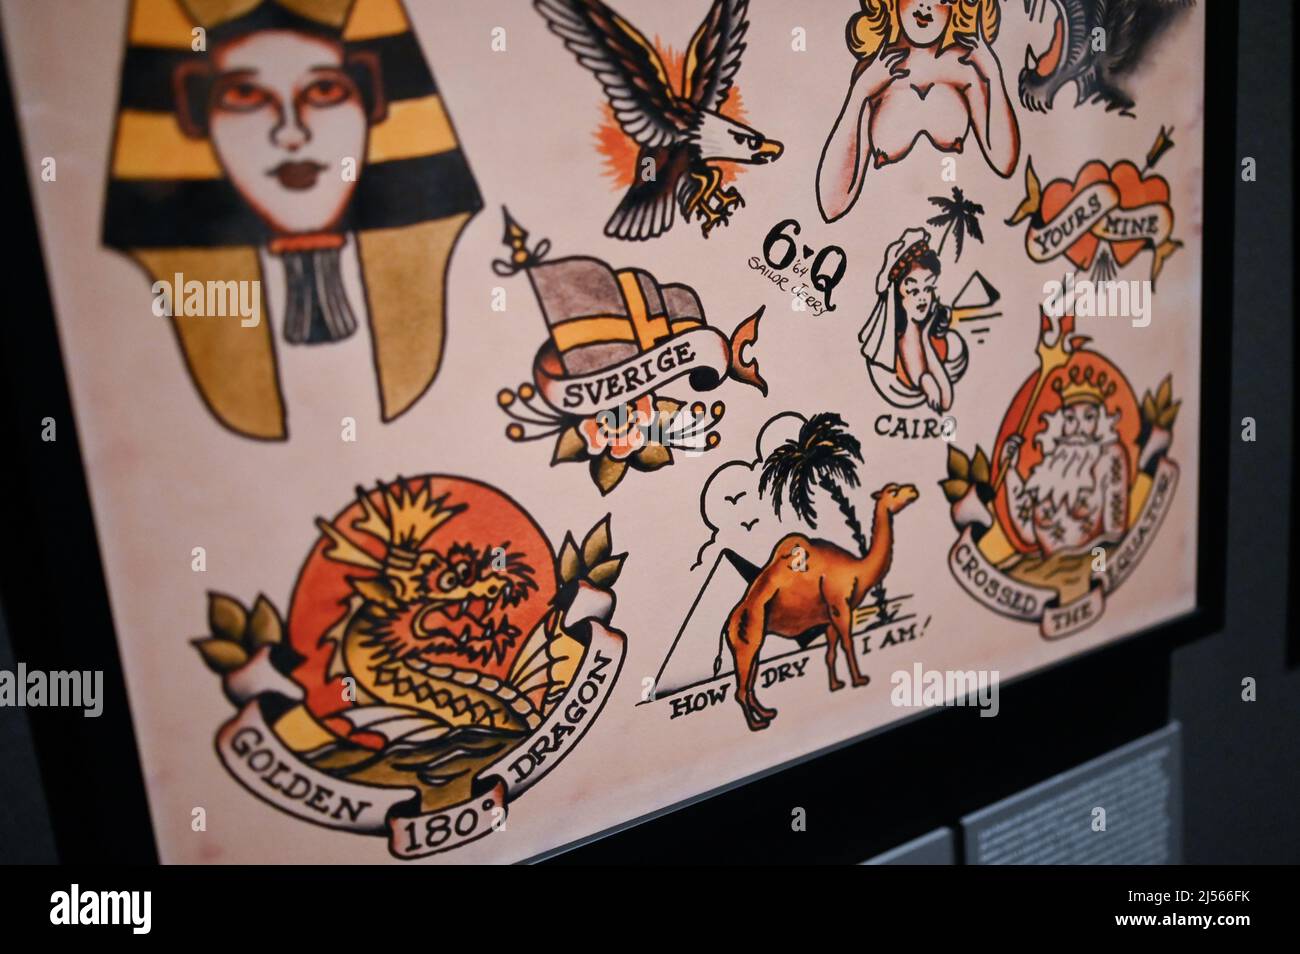 Tattoo designs by Sailor Jerry.    'Tattoo. Art Under the Skin' in CaixaForum Madrid, the biggest exhibition ever devoted to the history of tattooing, Stock Photo